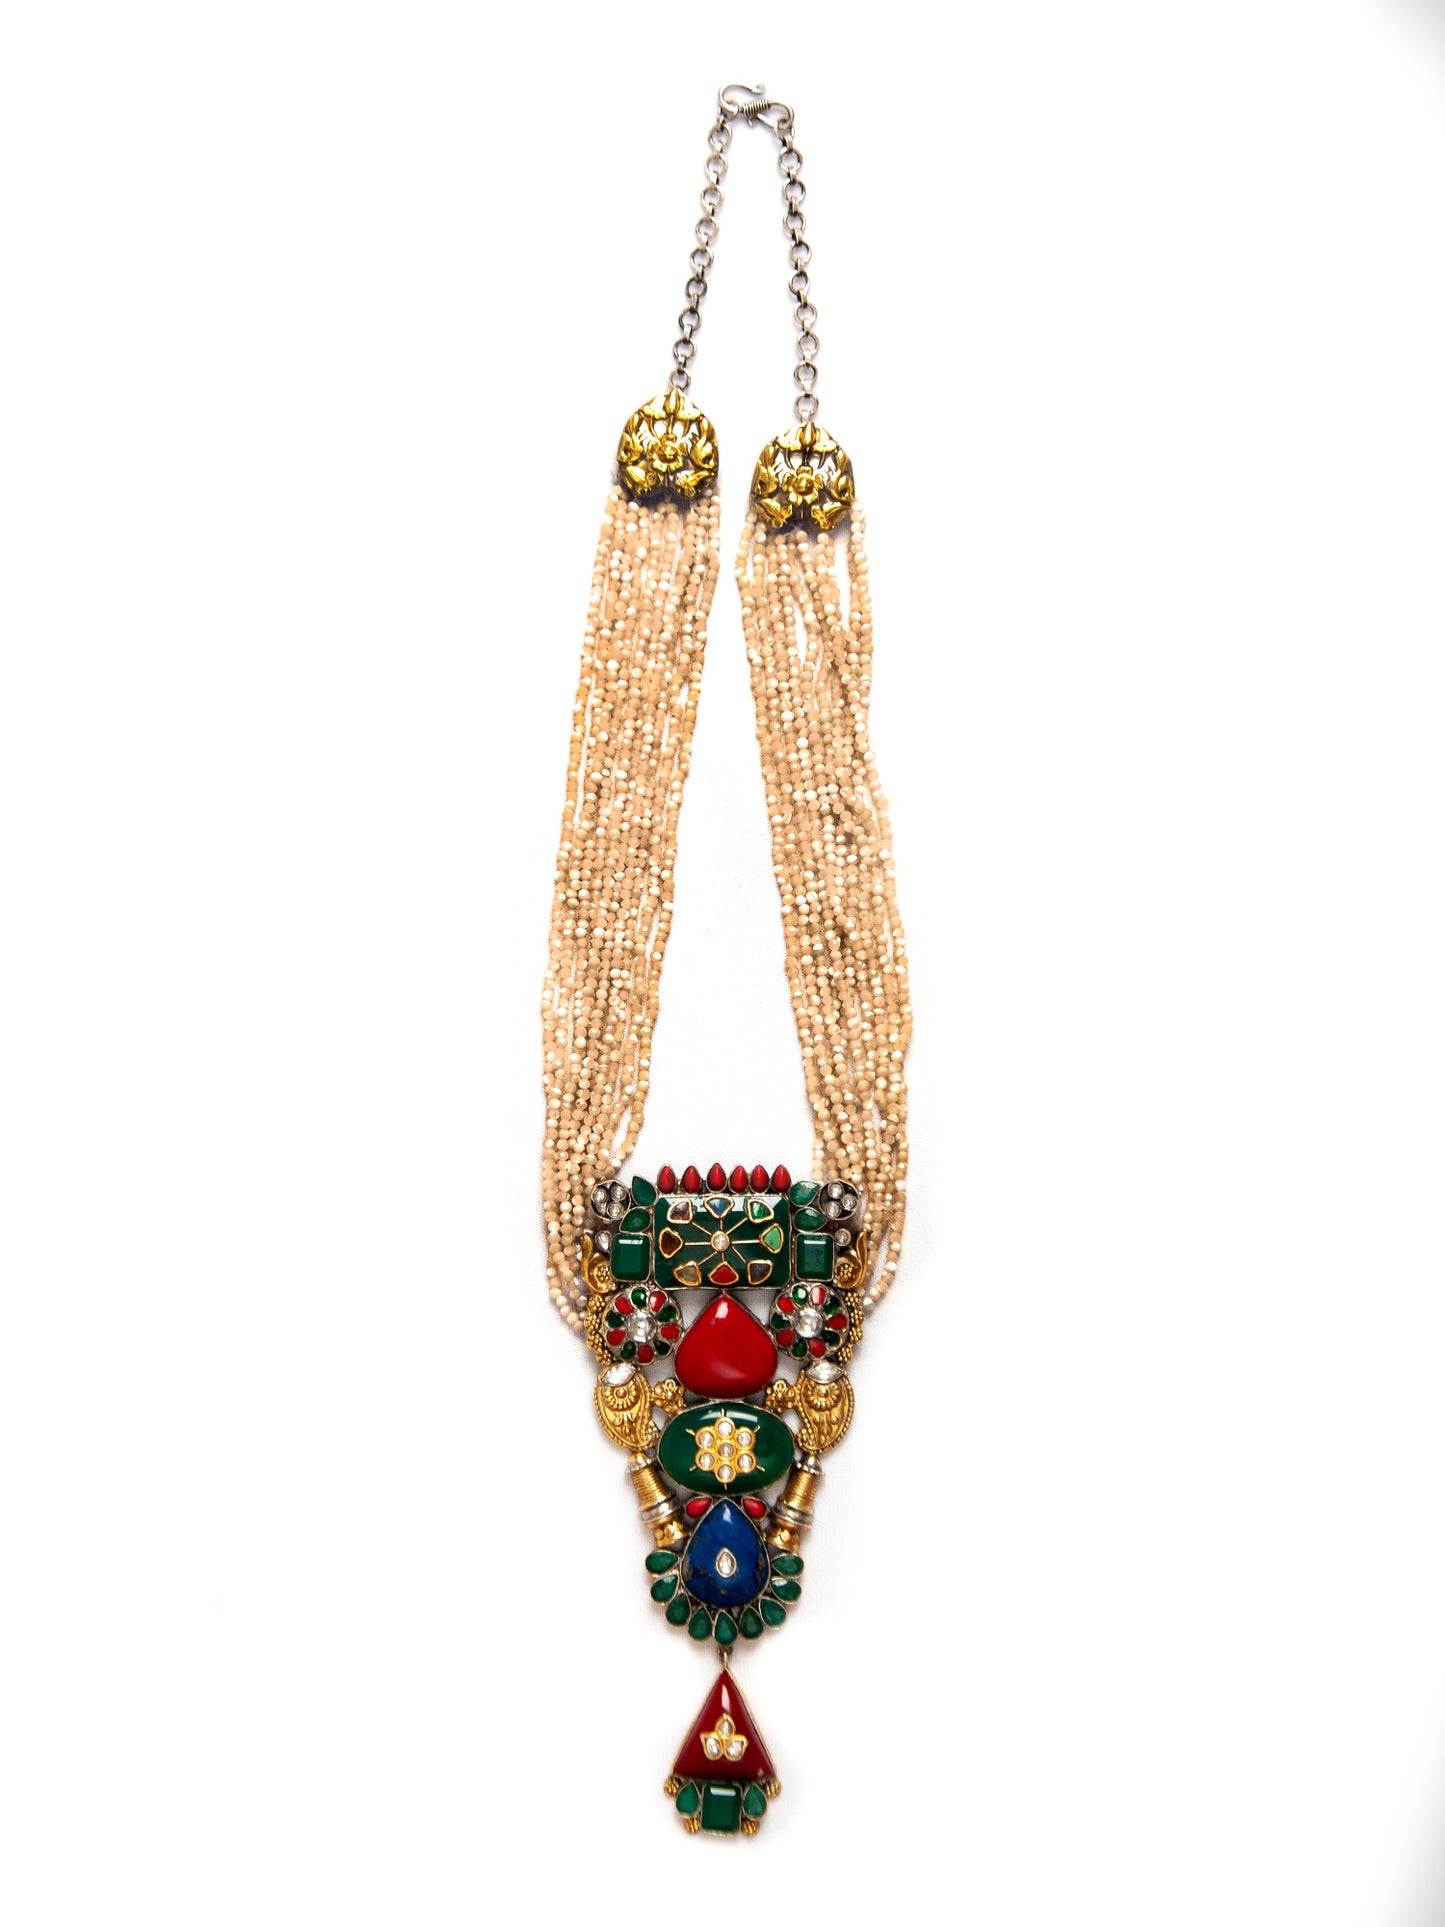 Svarnam Fusion Statement Necklace with Natural Stones